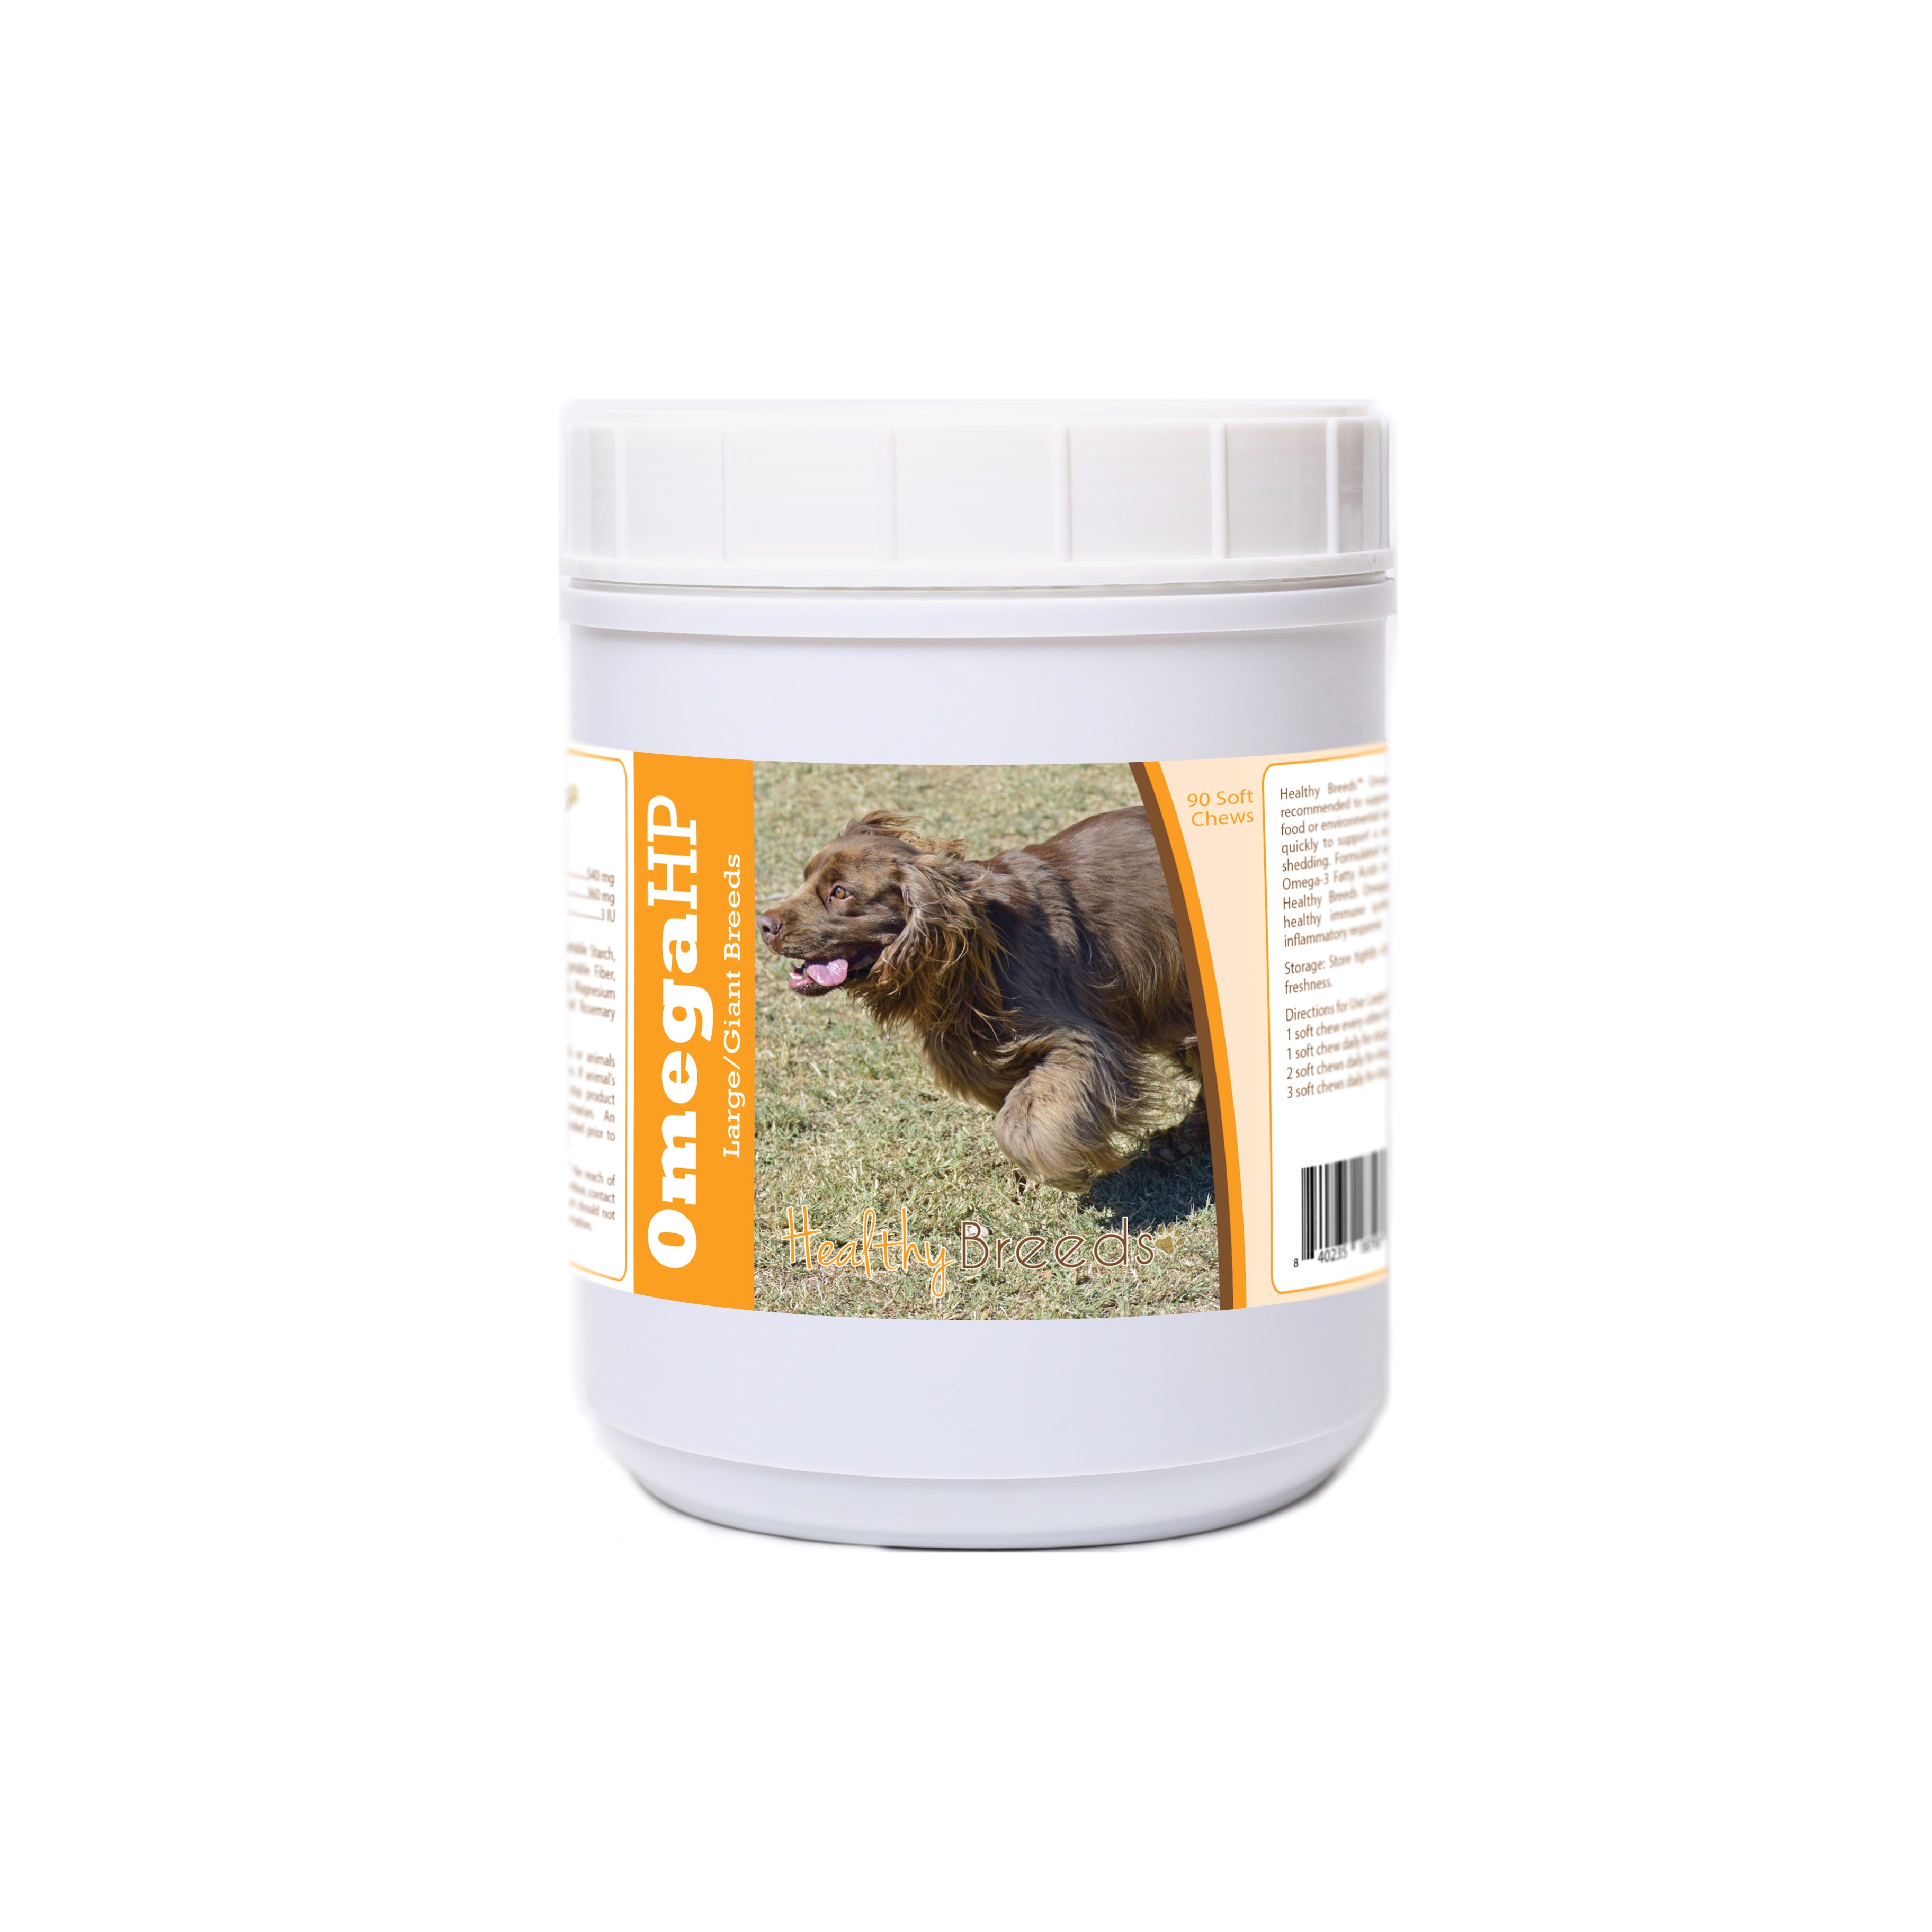 Sussex Spaniel Omega HP Fatty Acid Skin and Coat Support Soft Chews 90 Count